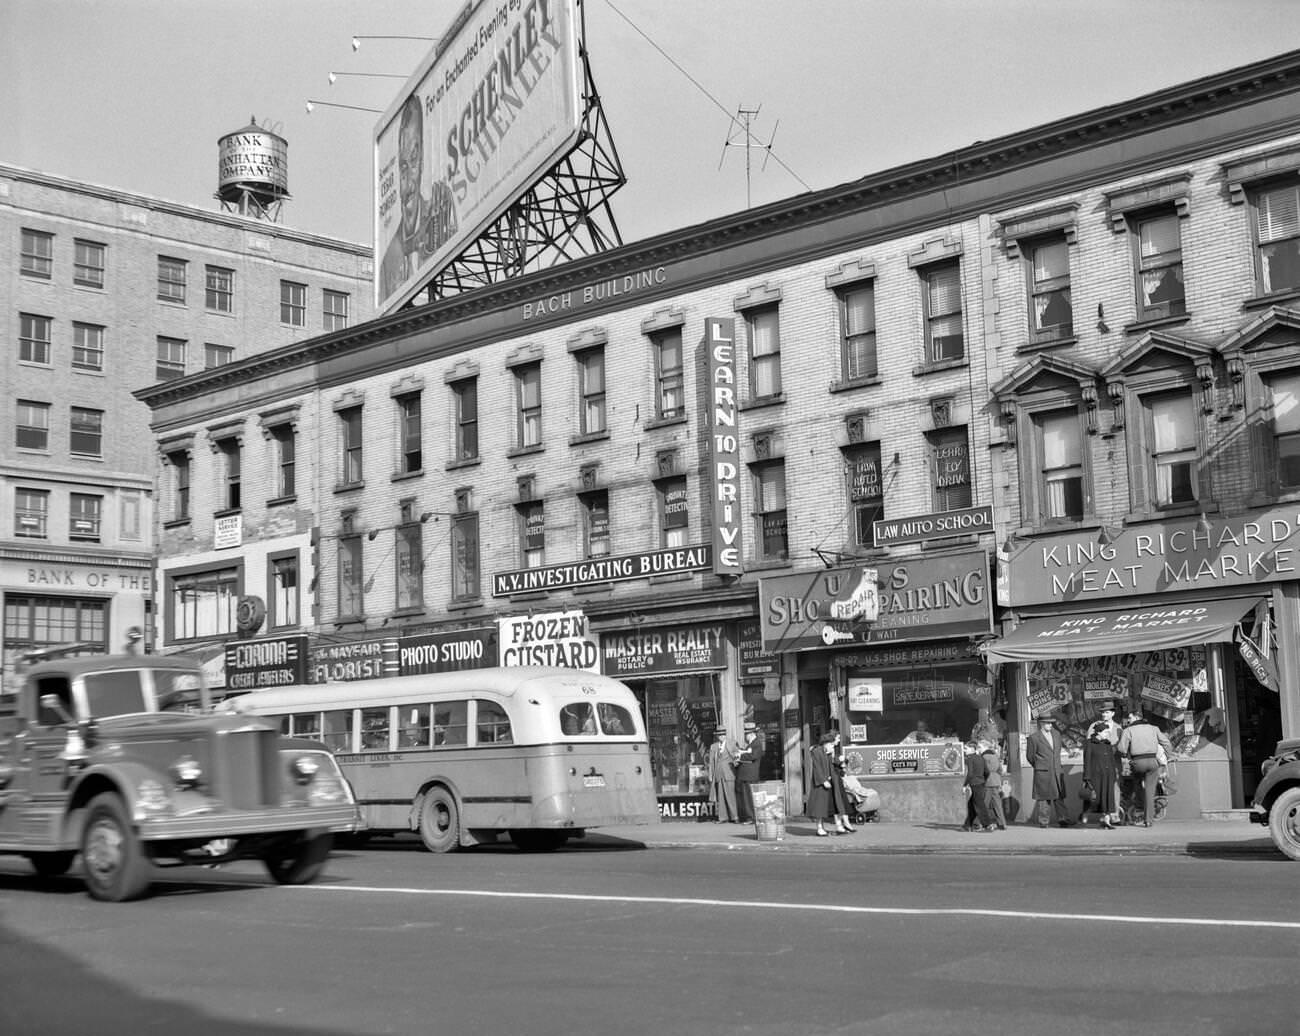 Main Street In Flushing, Queens With Storefronts, Buses, And Shoppers, 1950S